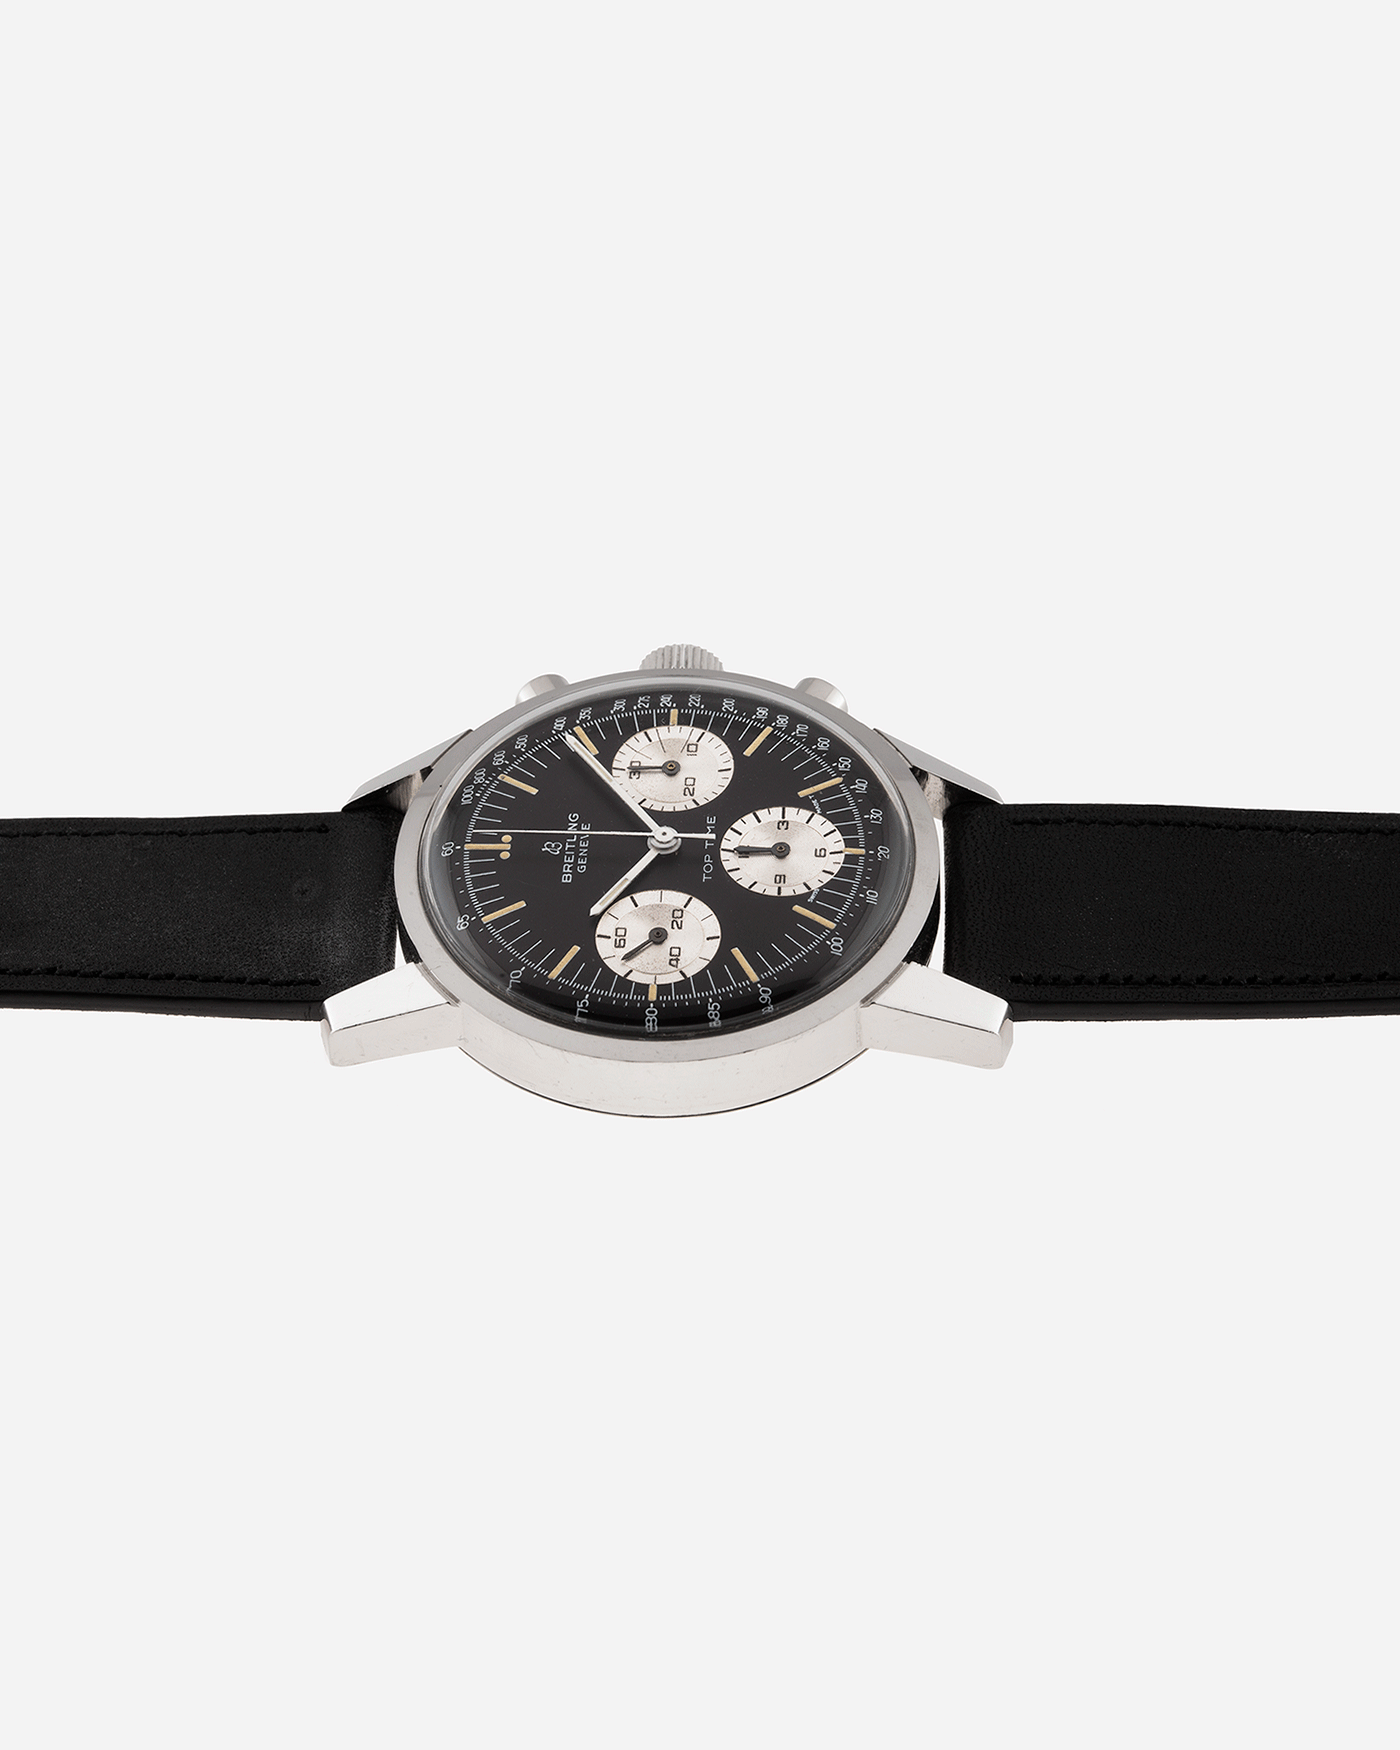 Brand: Breitling Year: 1960’s Model: Top Time Reference Number: 810 Material: Stainless Steel Movement: Manually wound Venus 178 Case Diameter: 38mm Lug Width: 18mm Bracelet/Strap: Nostime Black Calf